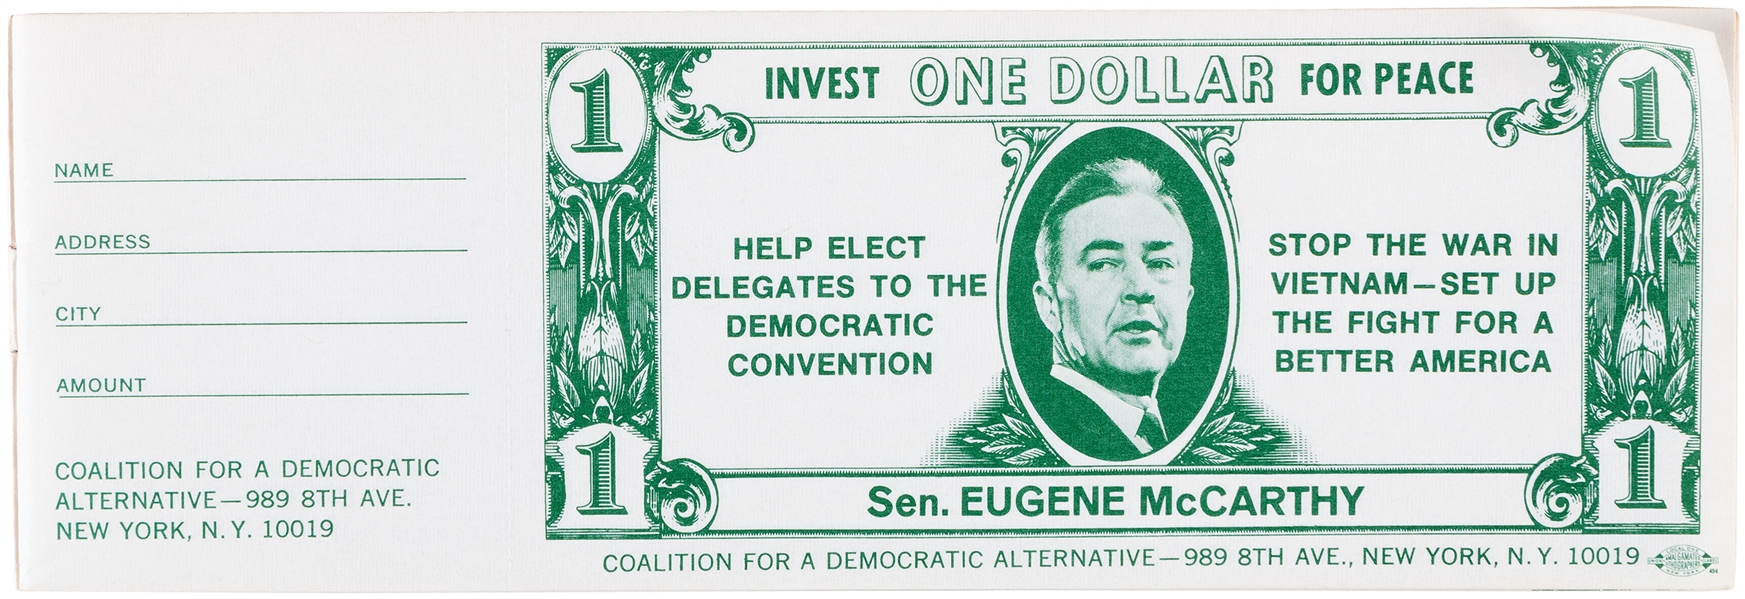 McCARTHY 1968 “ONE DOLLAR FOR PEACE” FULL BOOKLET OF 20 DONATION CERTIFICATES.